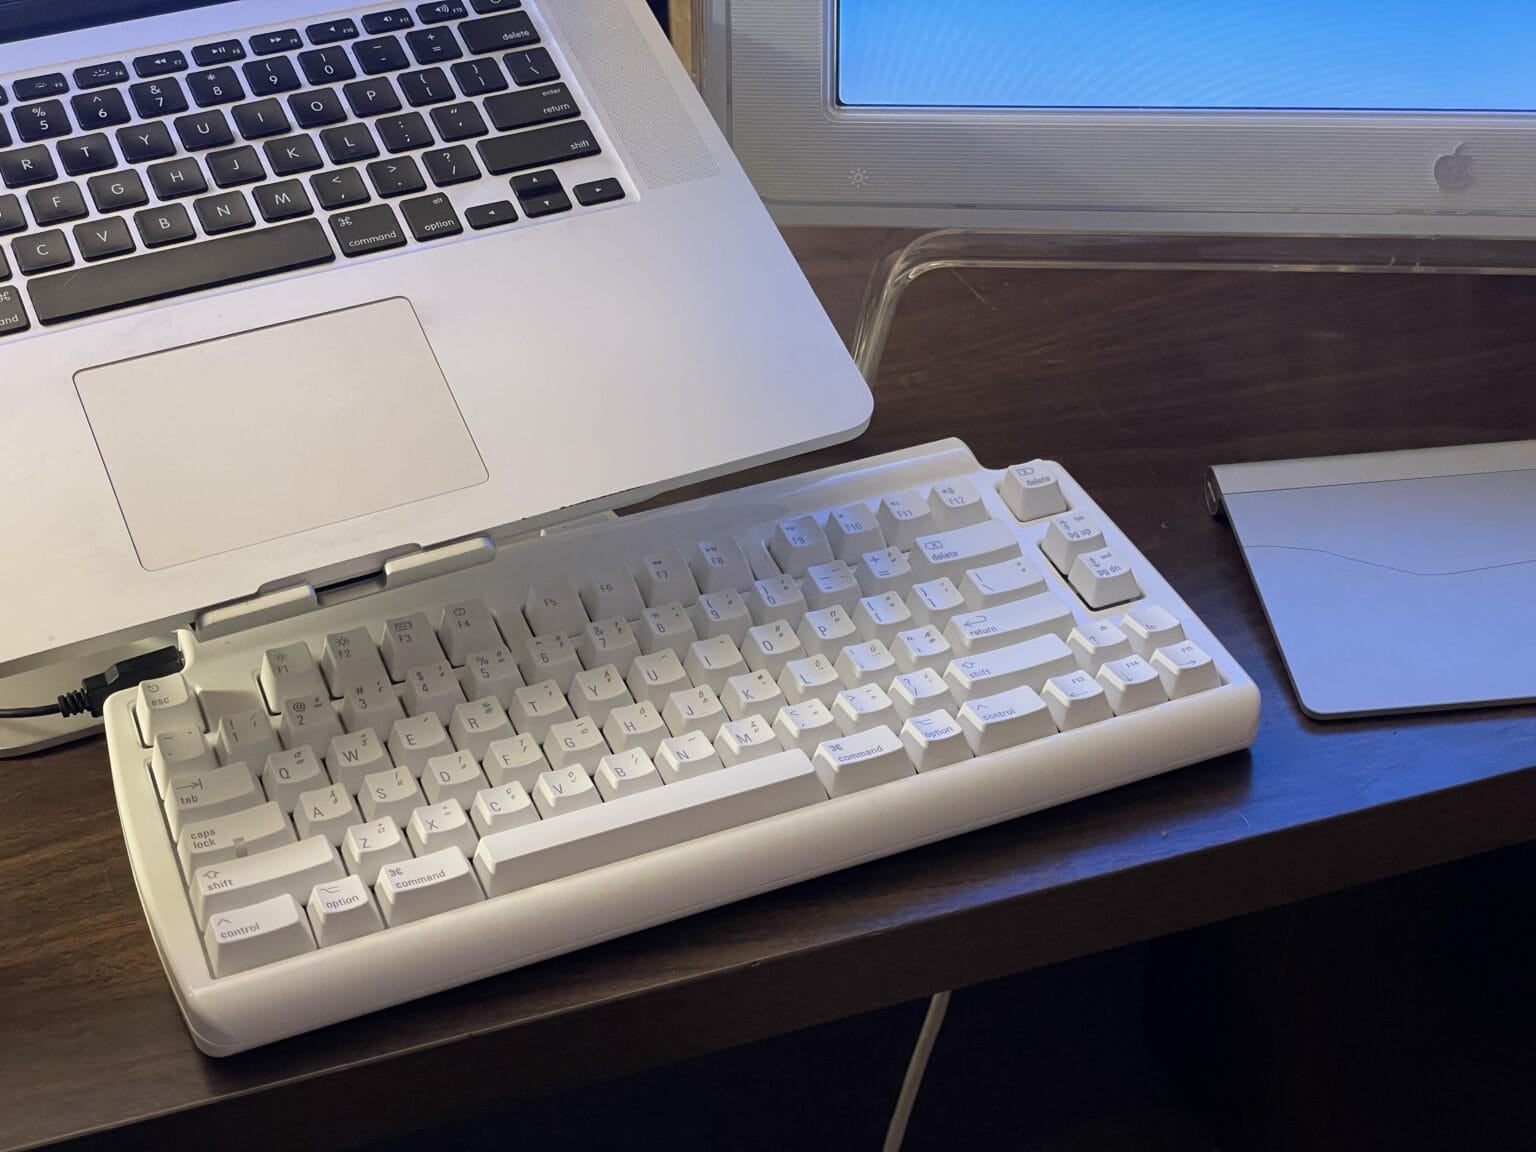 The Matias keyboard on my desk. The Mac sits on the mStand next to an Apple Cinema Display and Magic Trackpad.